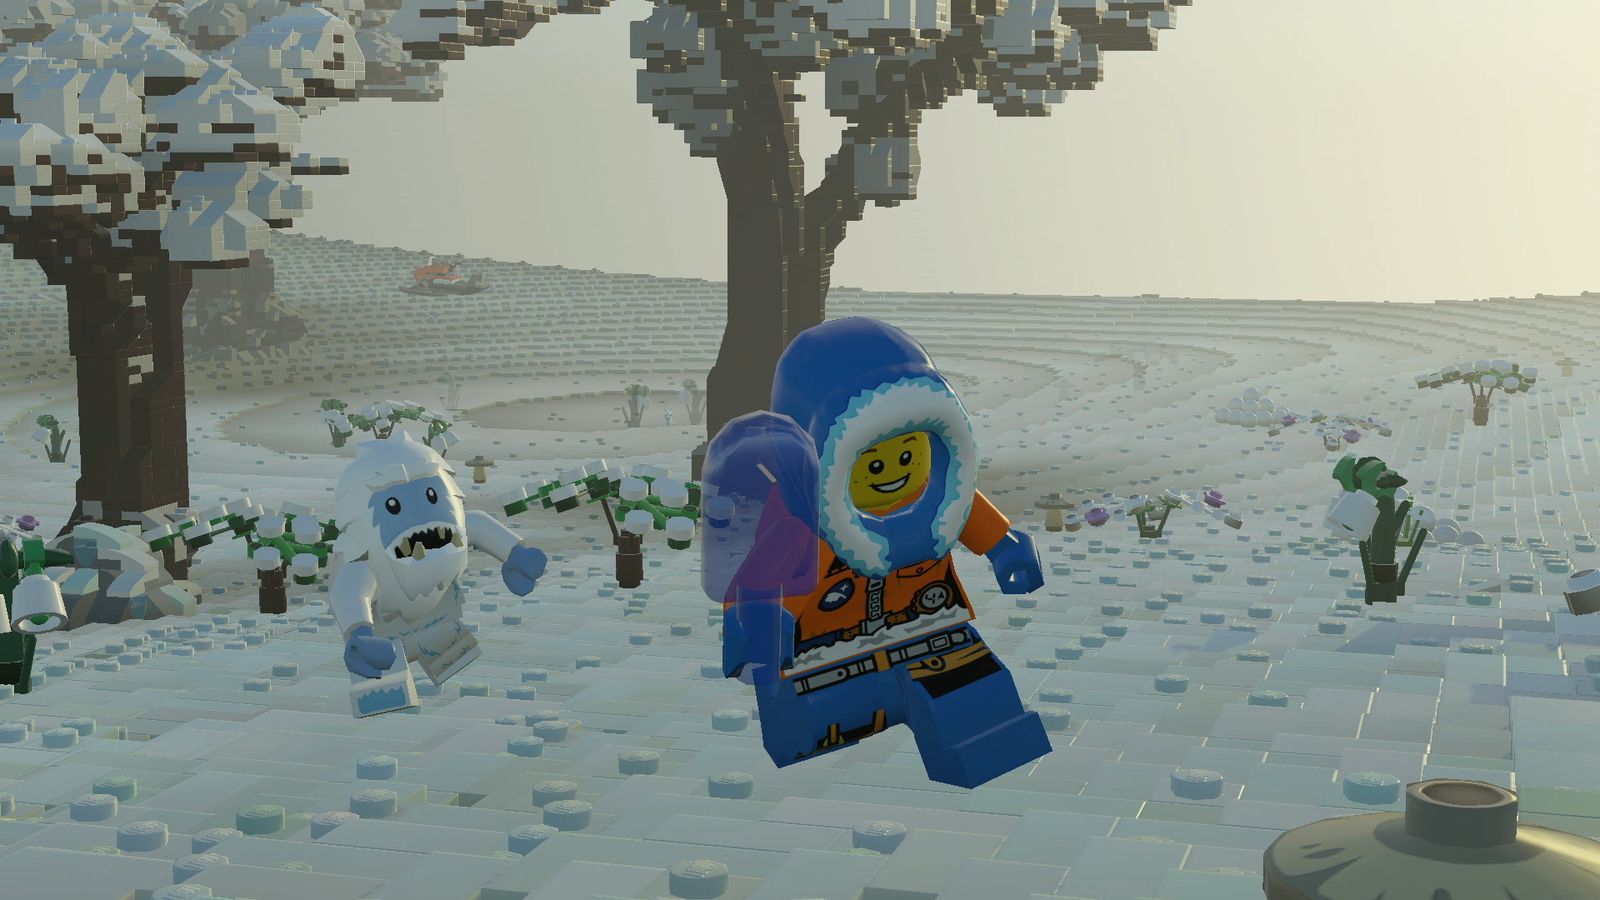 In-game image from LEGO Worlds of a LEGO character wearing a blue hood and orange clothing running from a snowy monster in a snowy landscape.